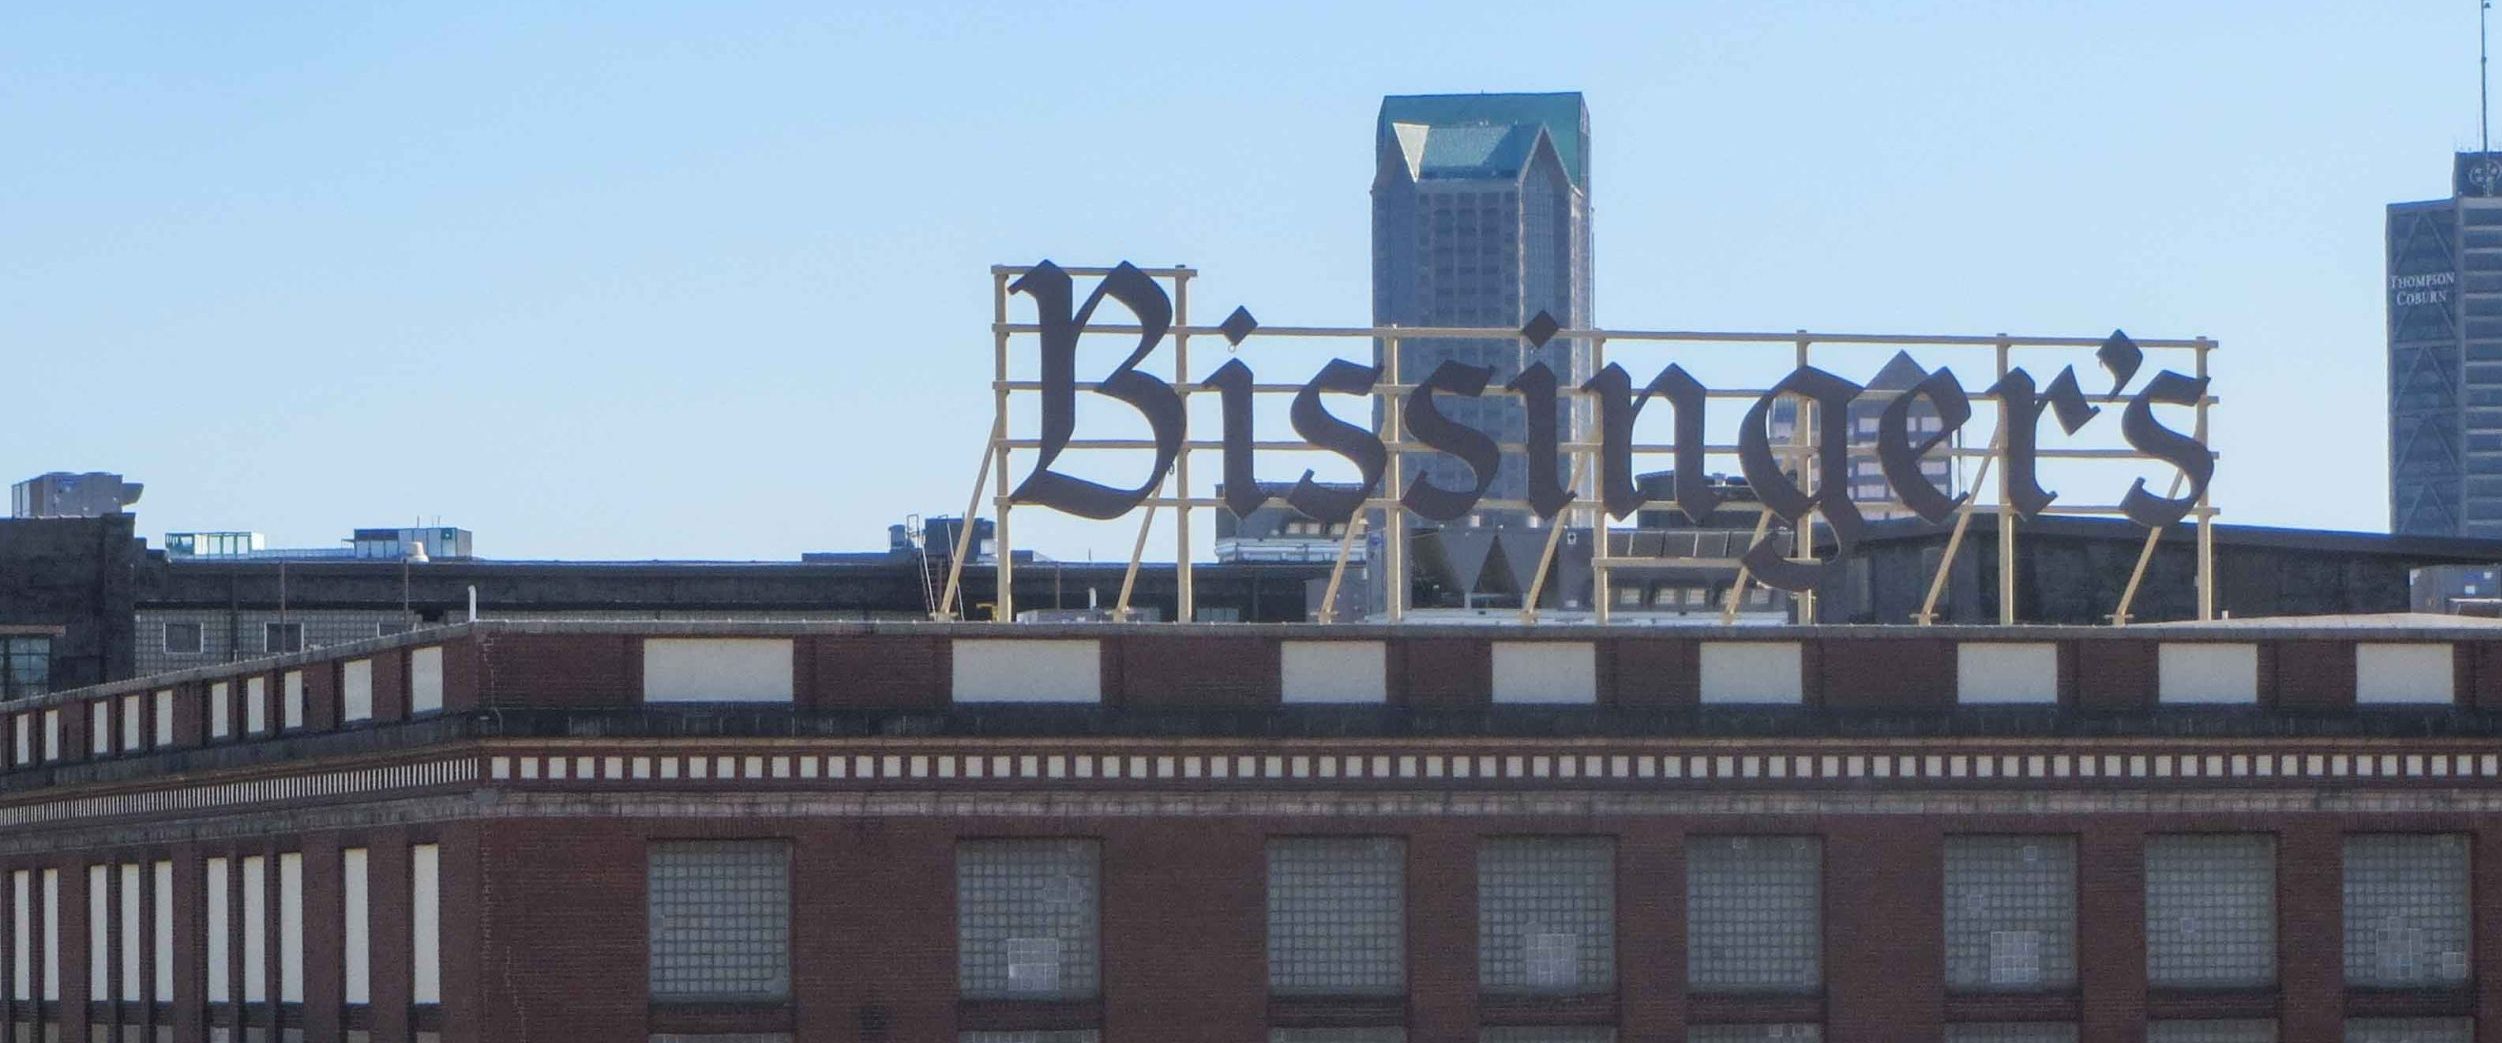 Large rooftop Signage for Bissinger's chocolatiers